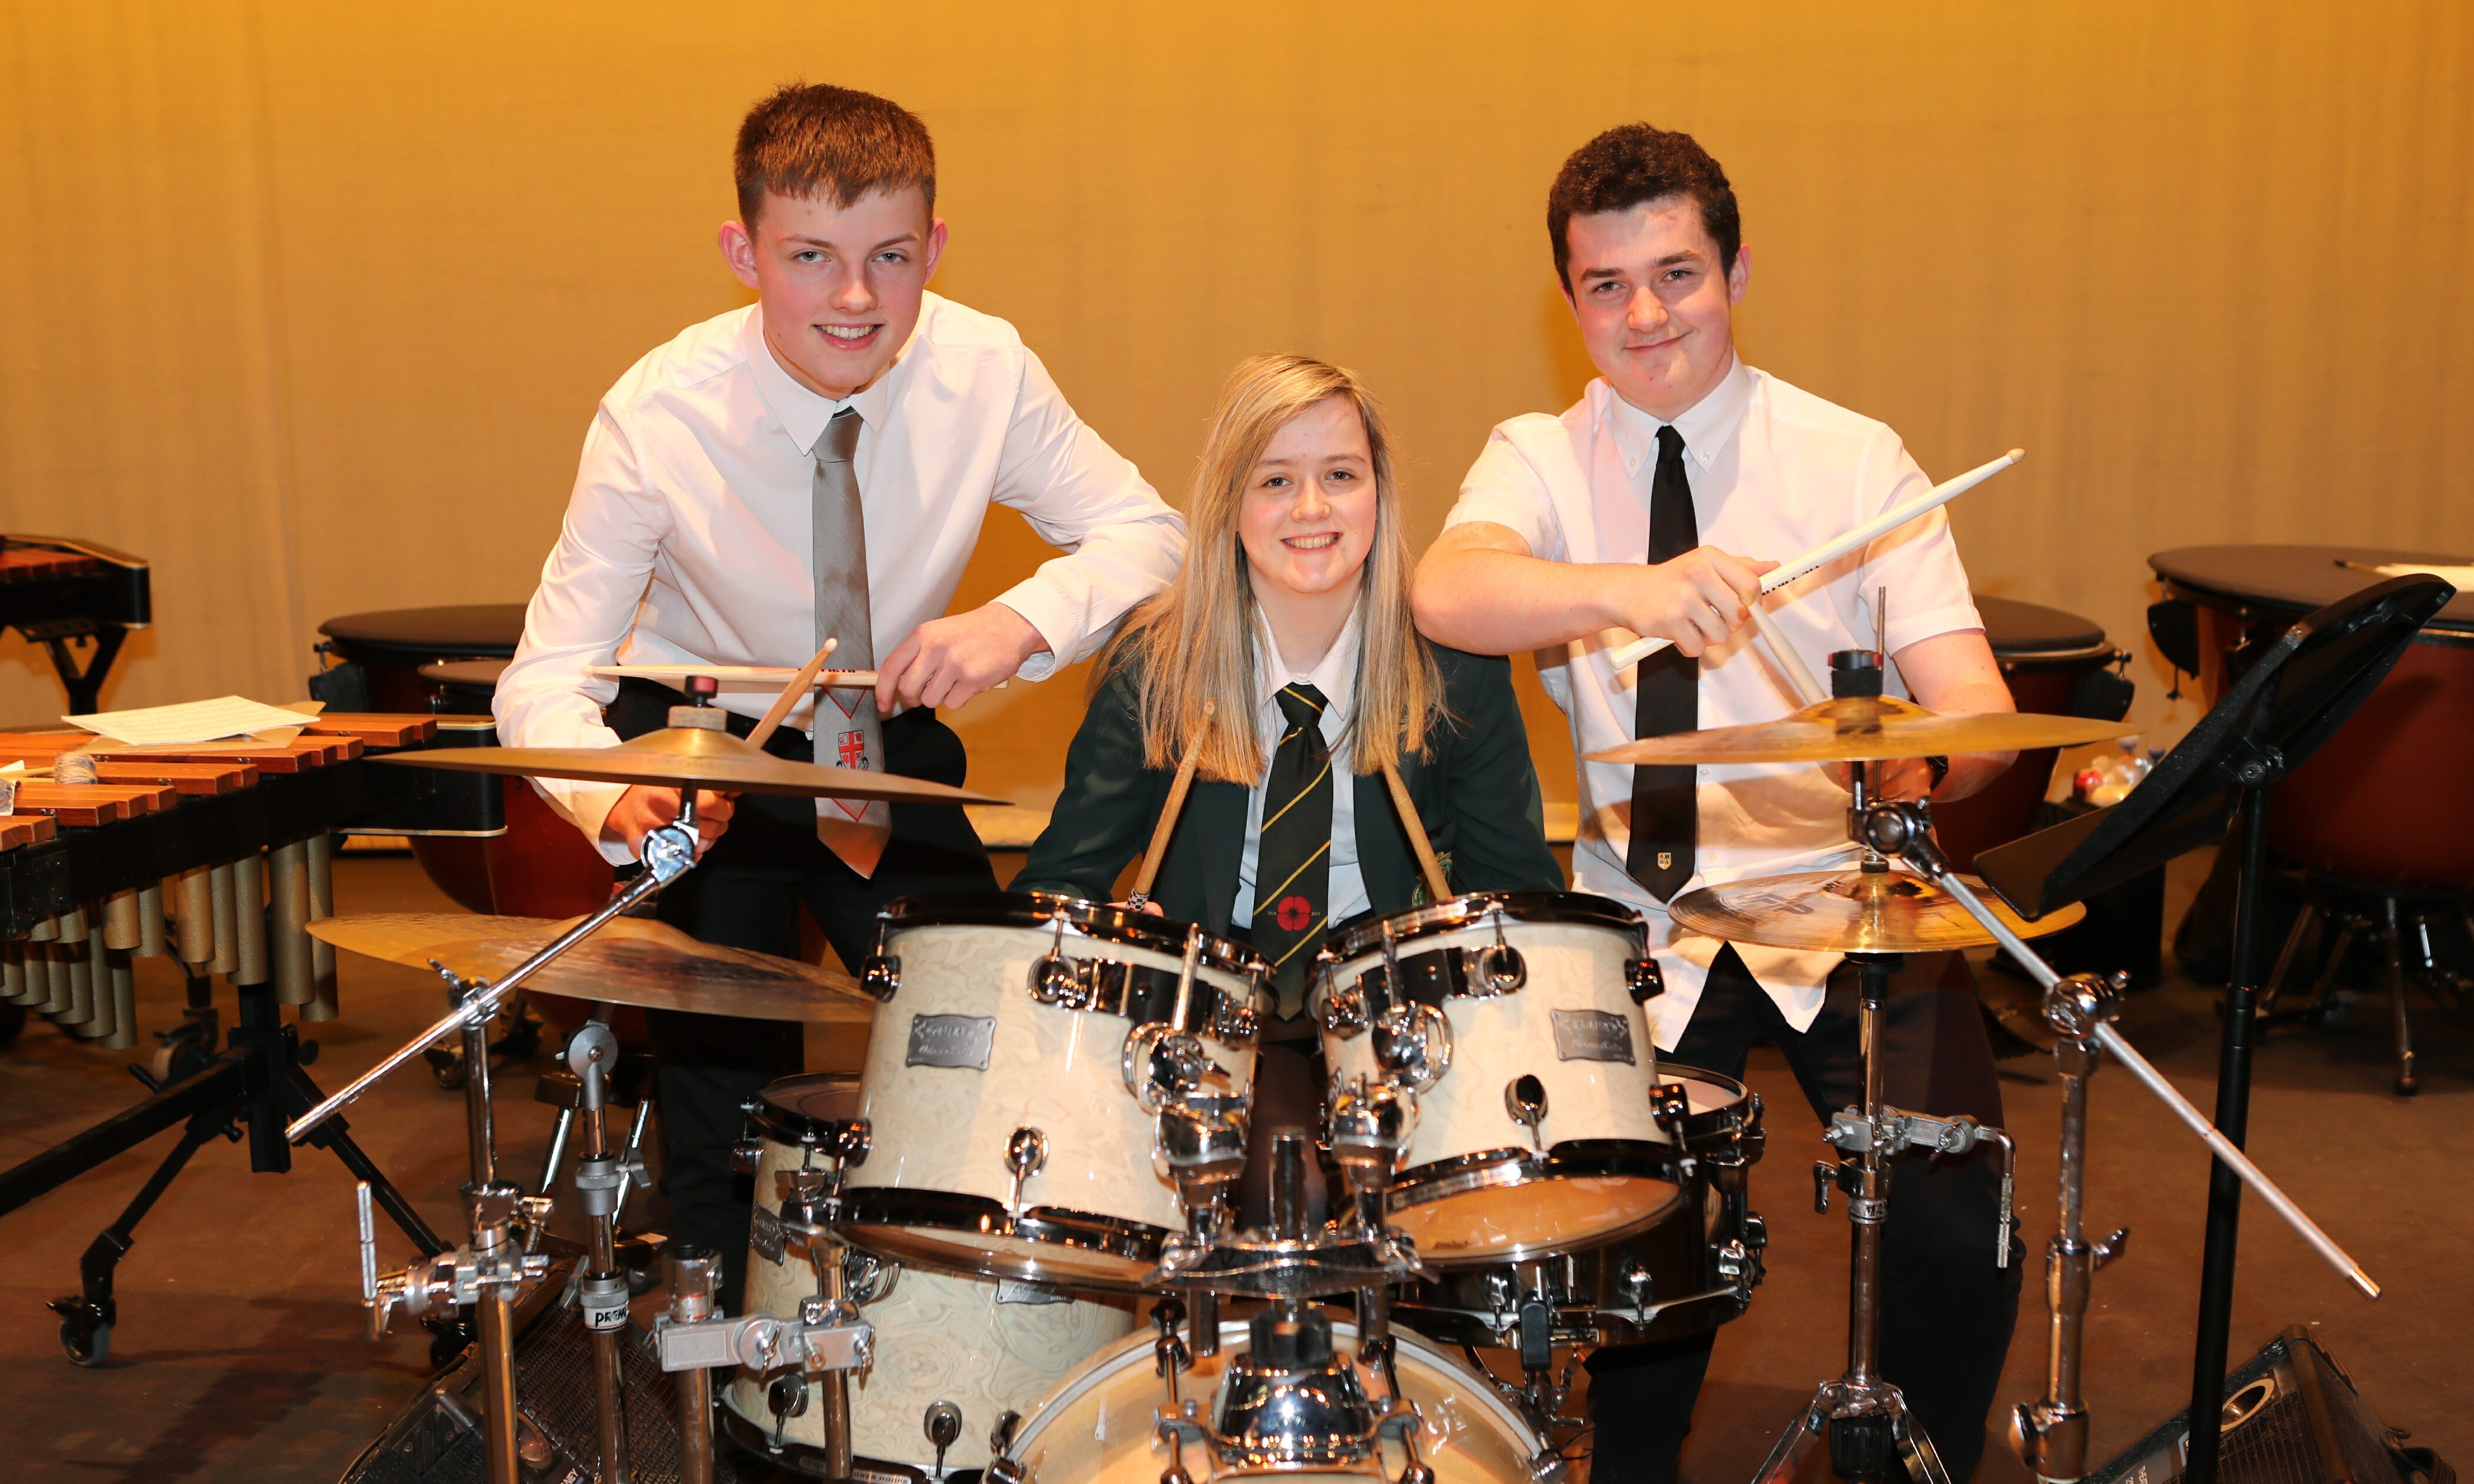 Josh Craigie (16) Carnoustie High, Abaigh McMenaman (16) Arbroath High & Ryan Cull (17) Arbroath Academy , competed in the class 110 Drumkit competition at the festival.